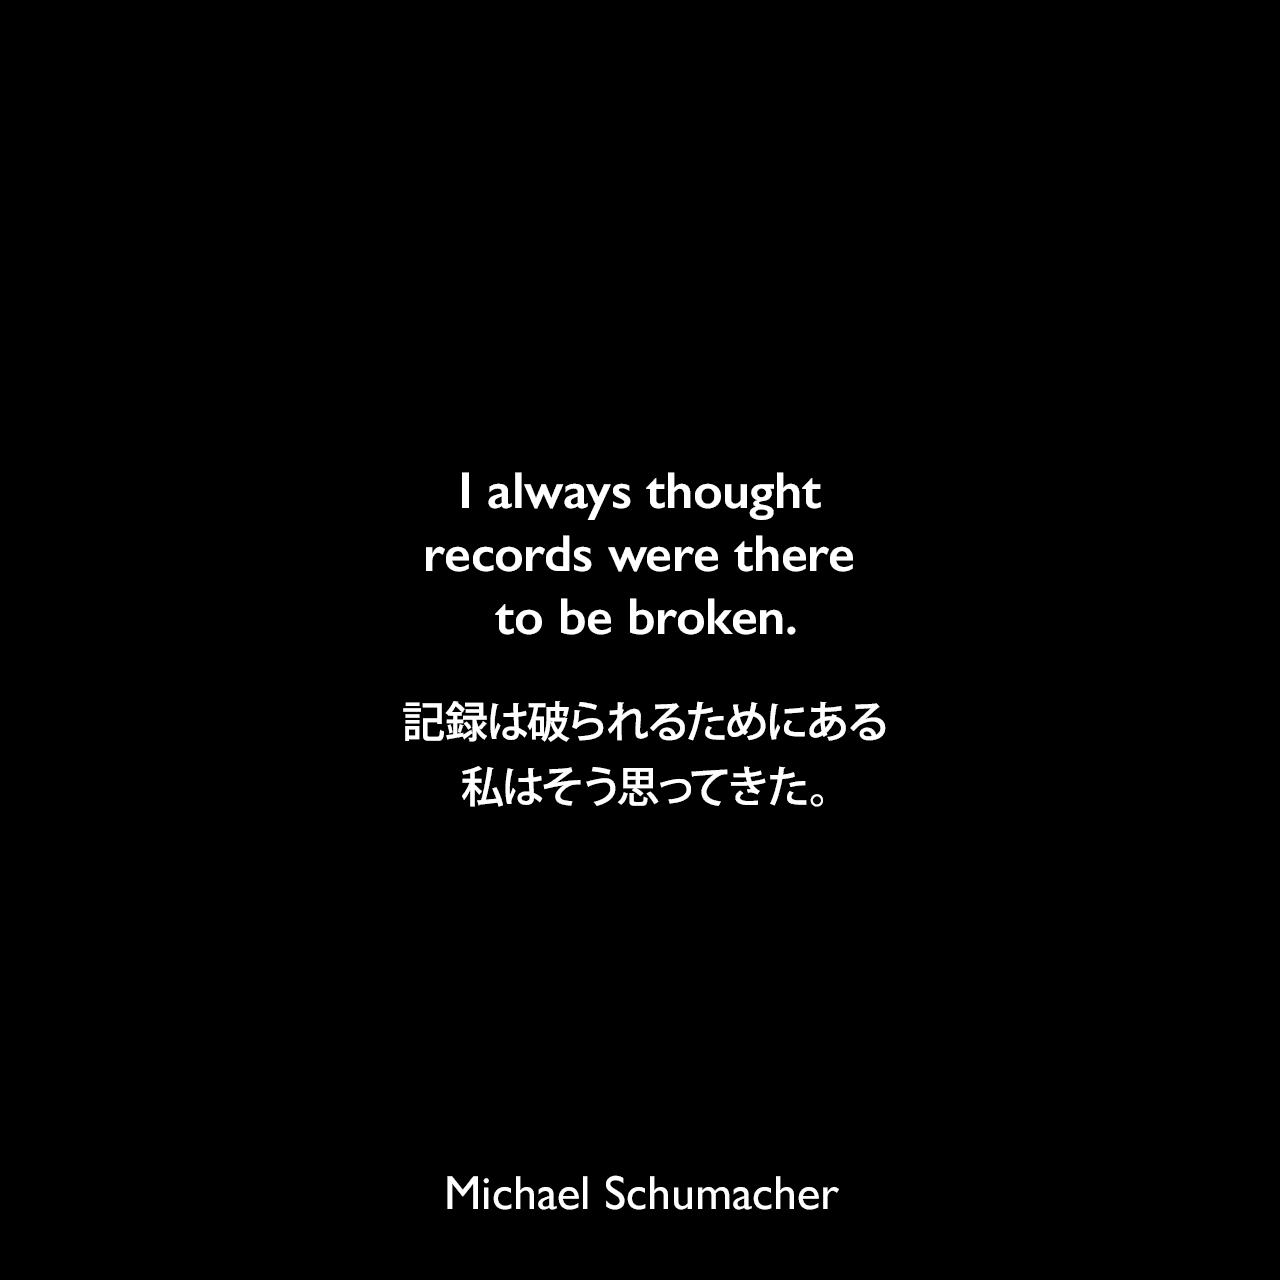 I always thought records were there to be broken.記録は破られるためにある、私はそう思ってきた。Michael Schumacher